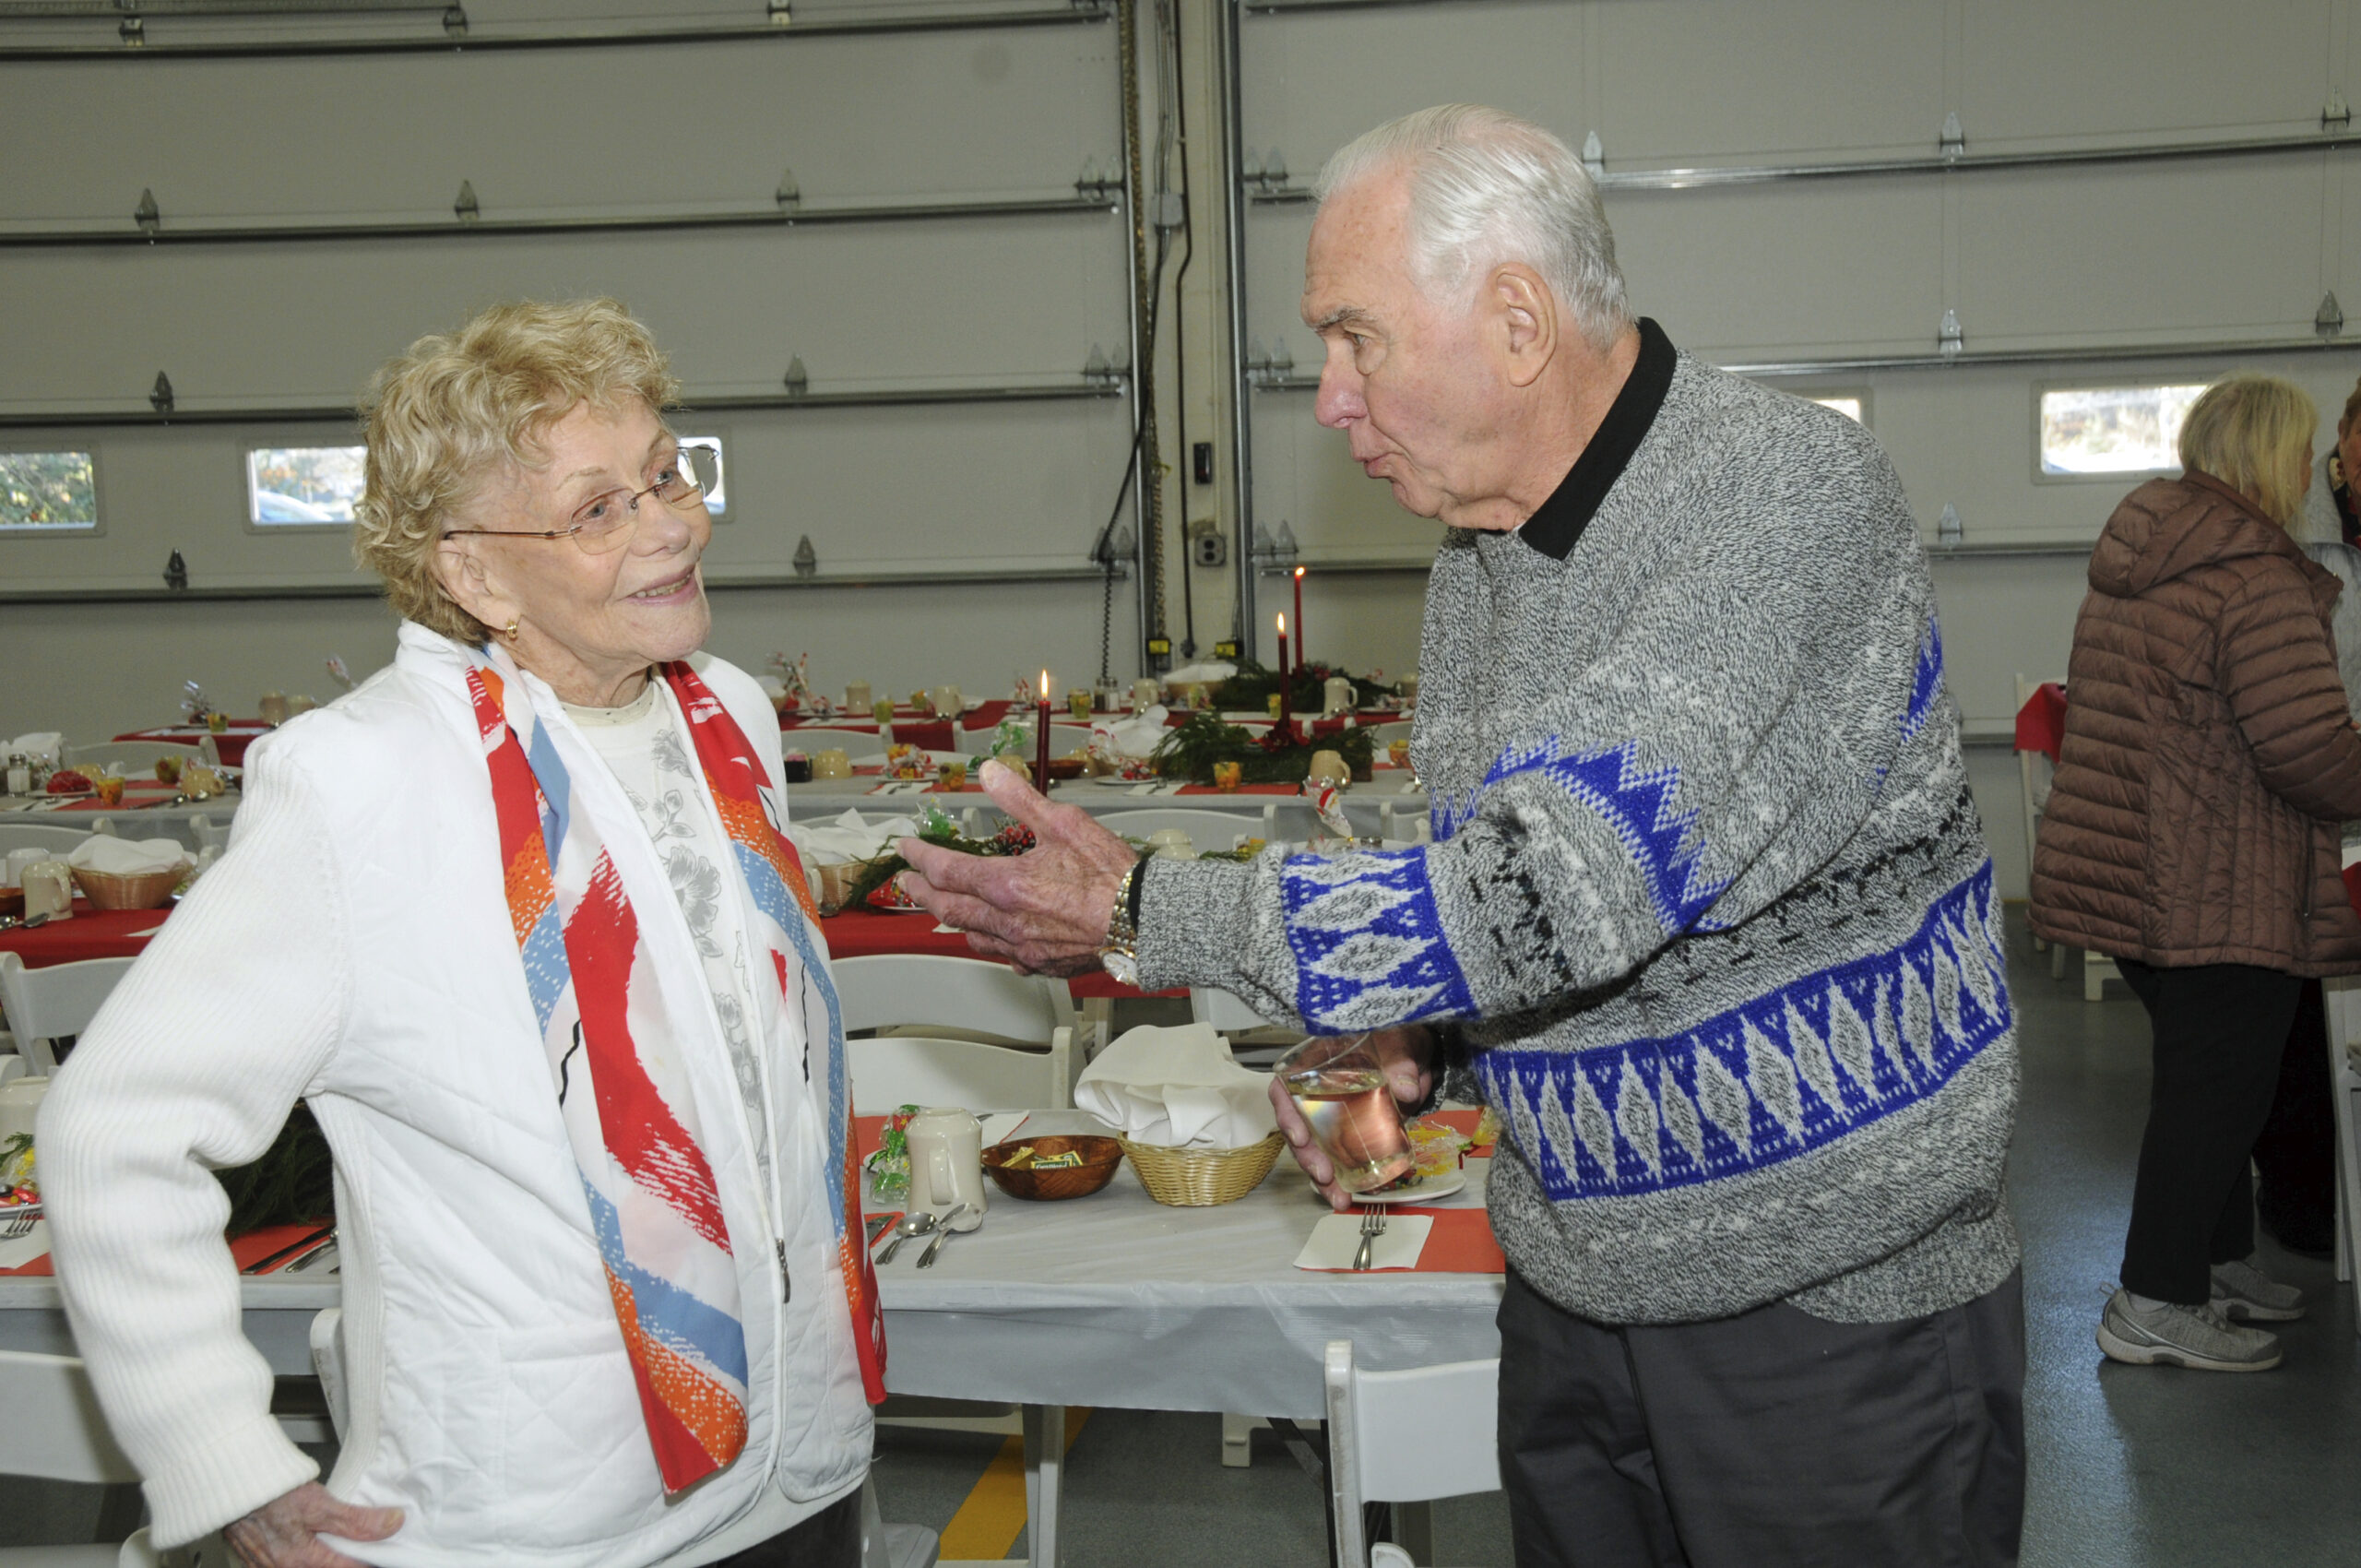 Helen Giustino and Herb Mocbeichel at the Montauk Fire Department's annual dinner for Seniors on Sunday. Equipment bays were cleared out to make room for festive dinner tables. MFD volunteers handed out 